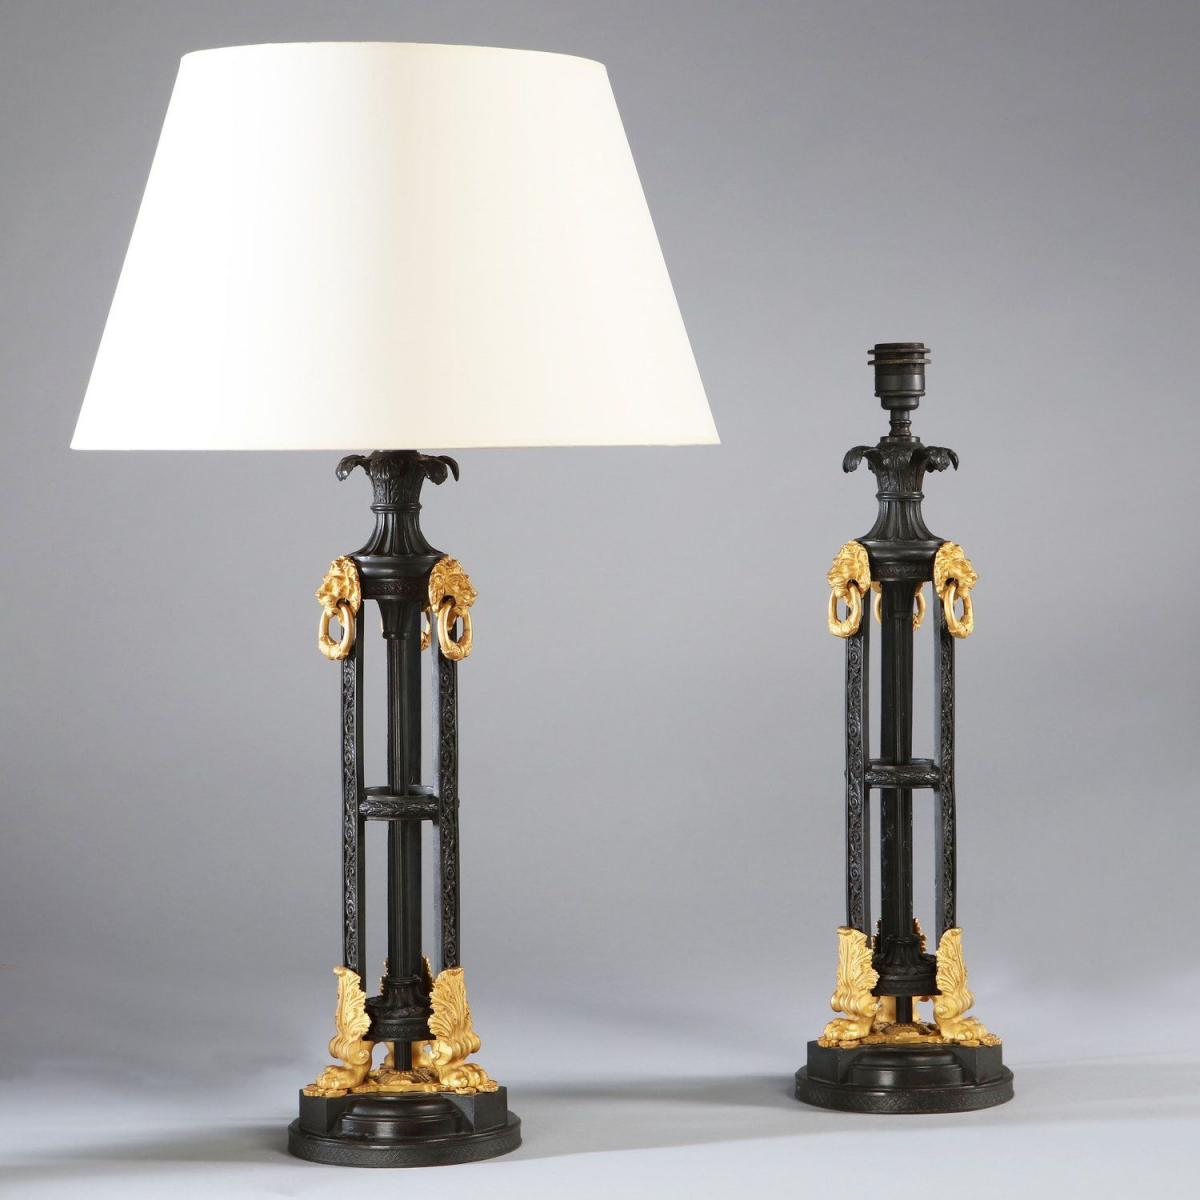 A Pair of Bronze and Ormolu Lamps